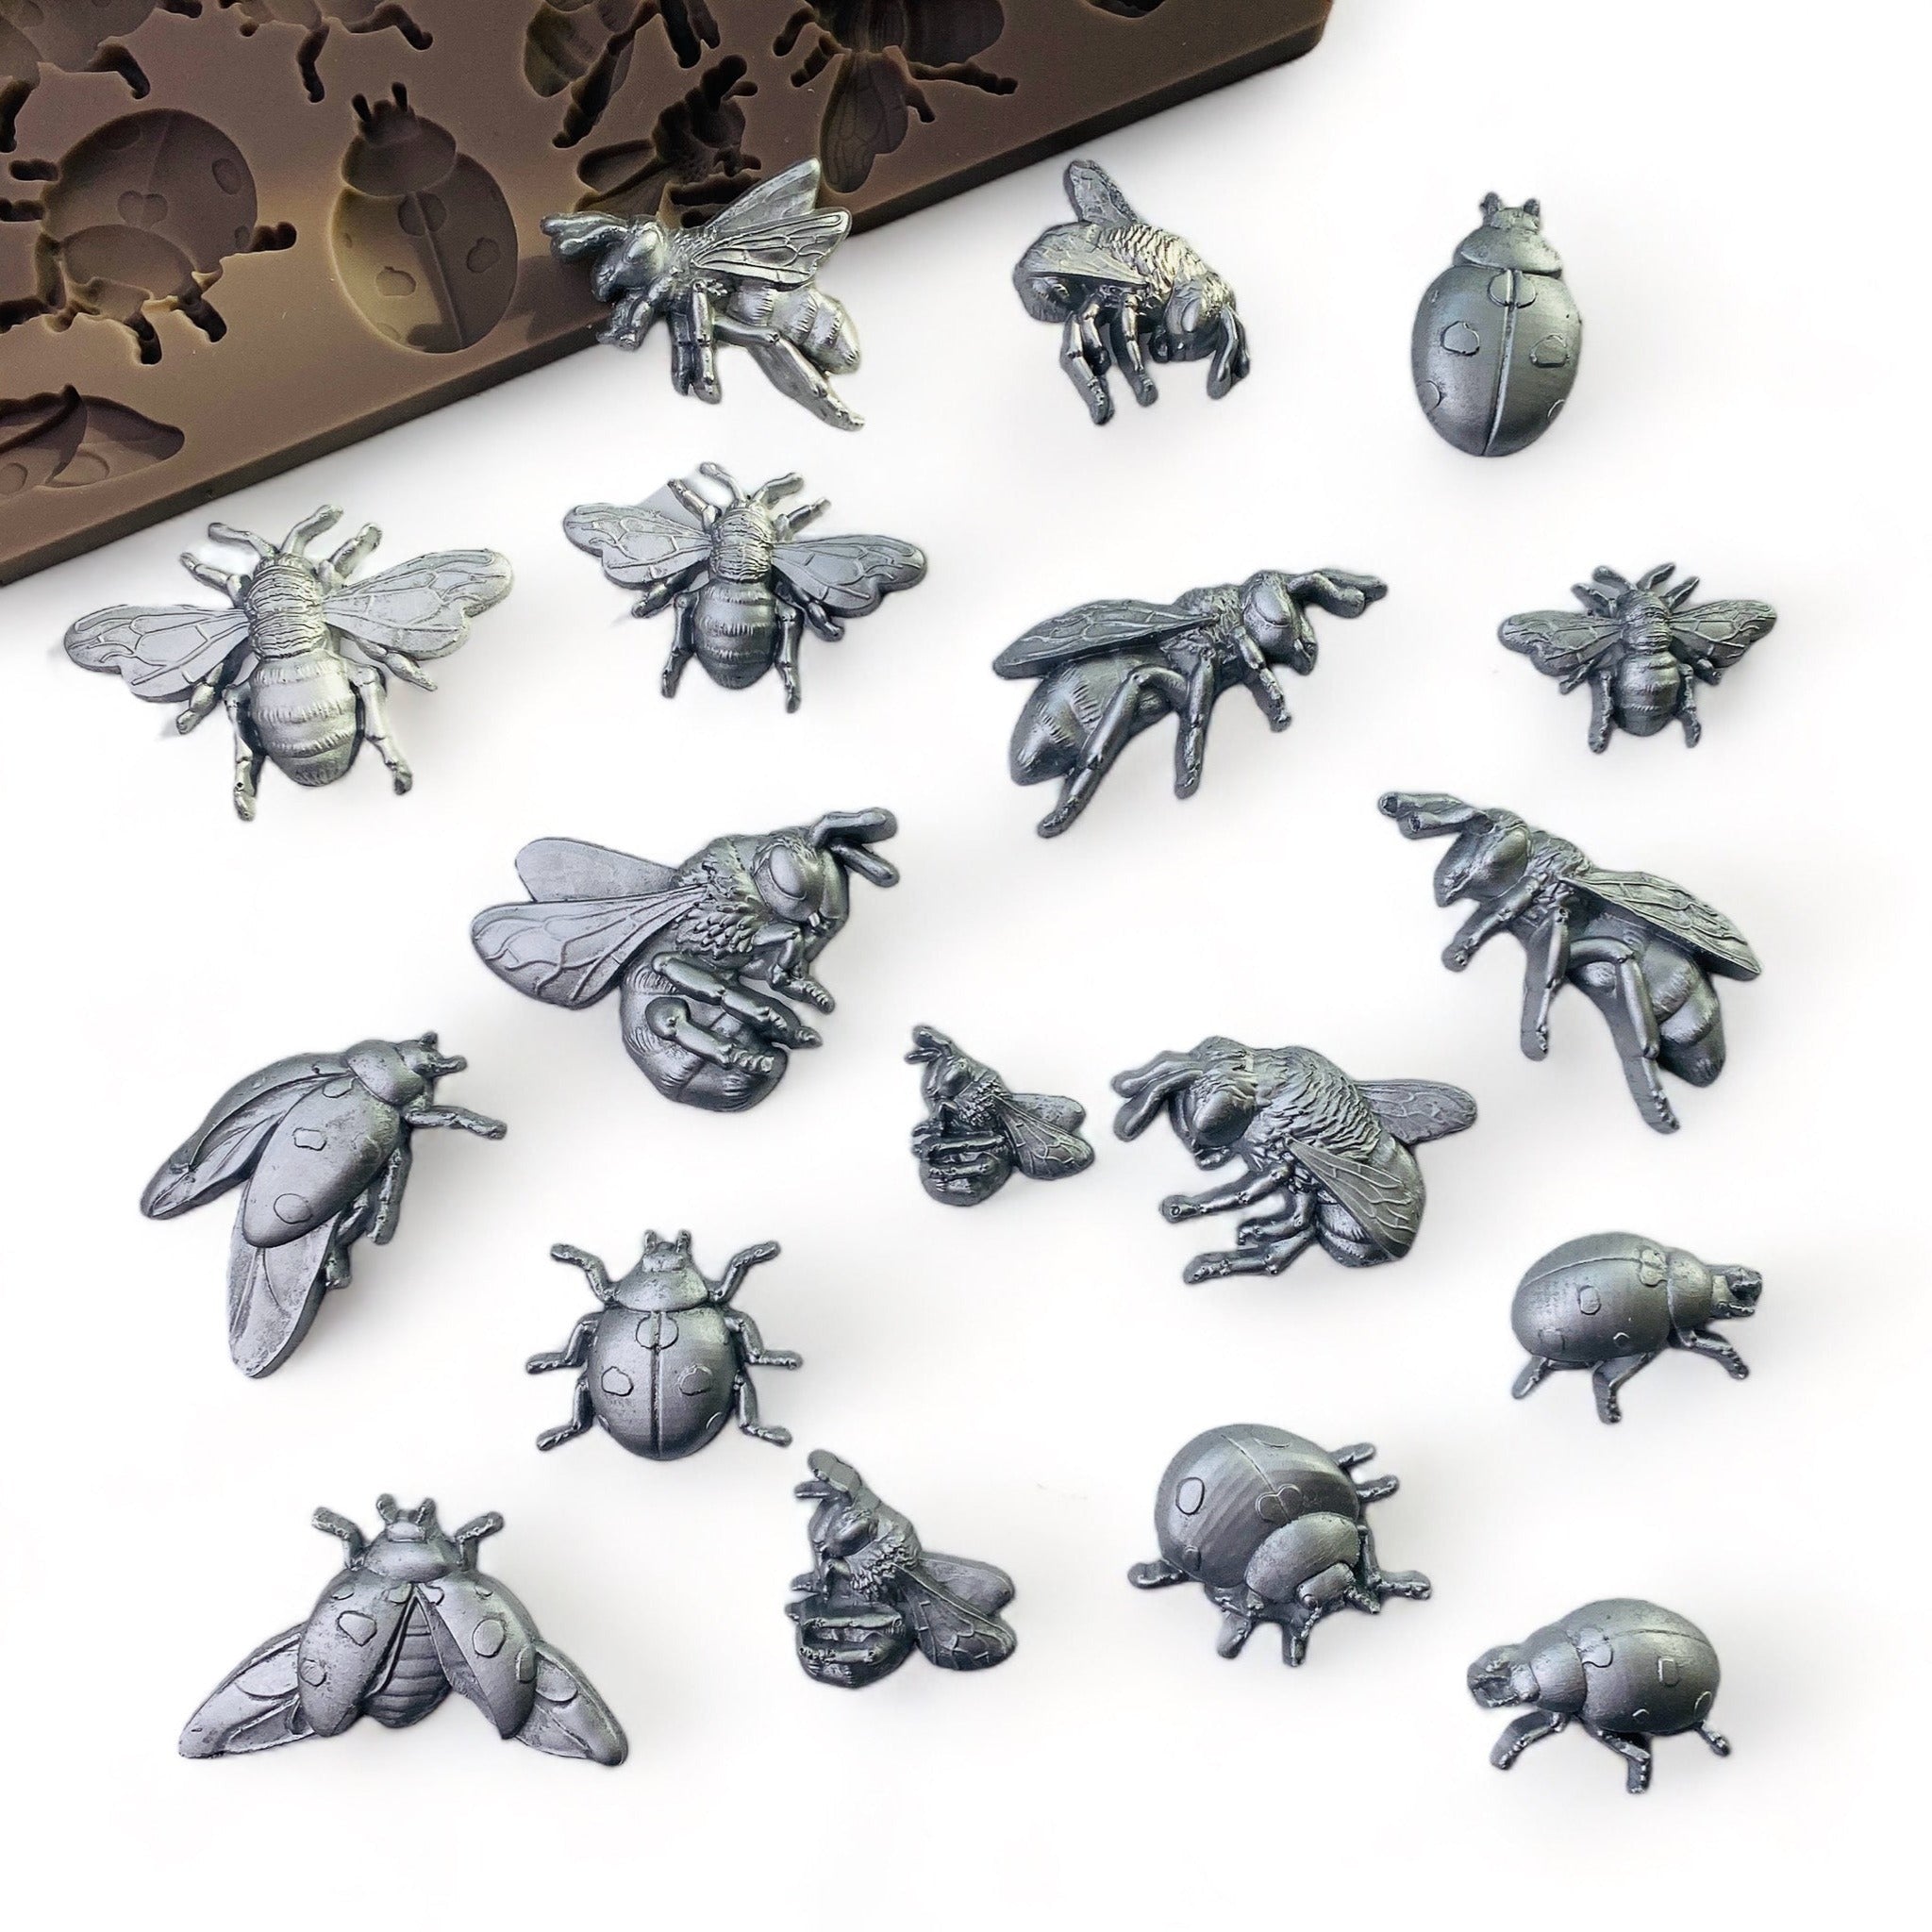 Silver colored silicone mold castings of 18 bees and ladybugs are against a white background.